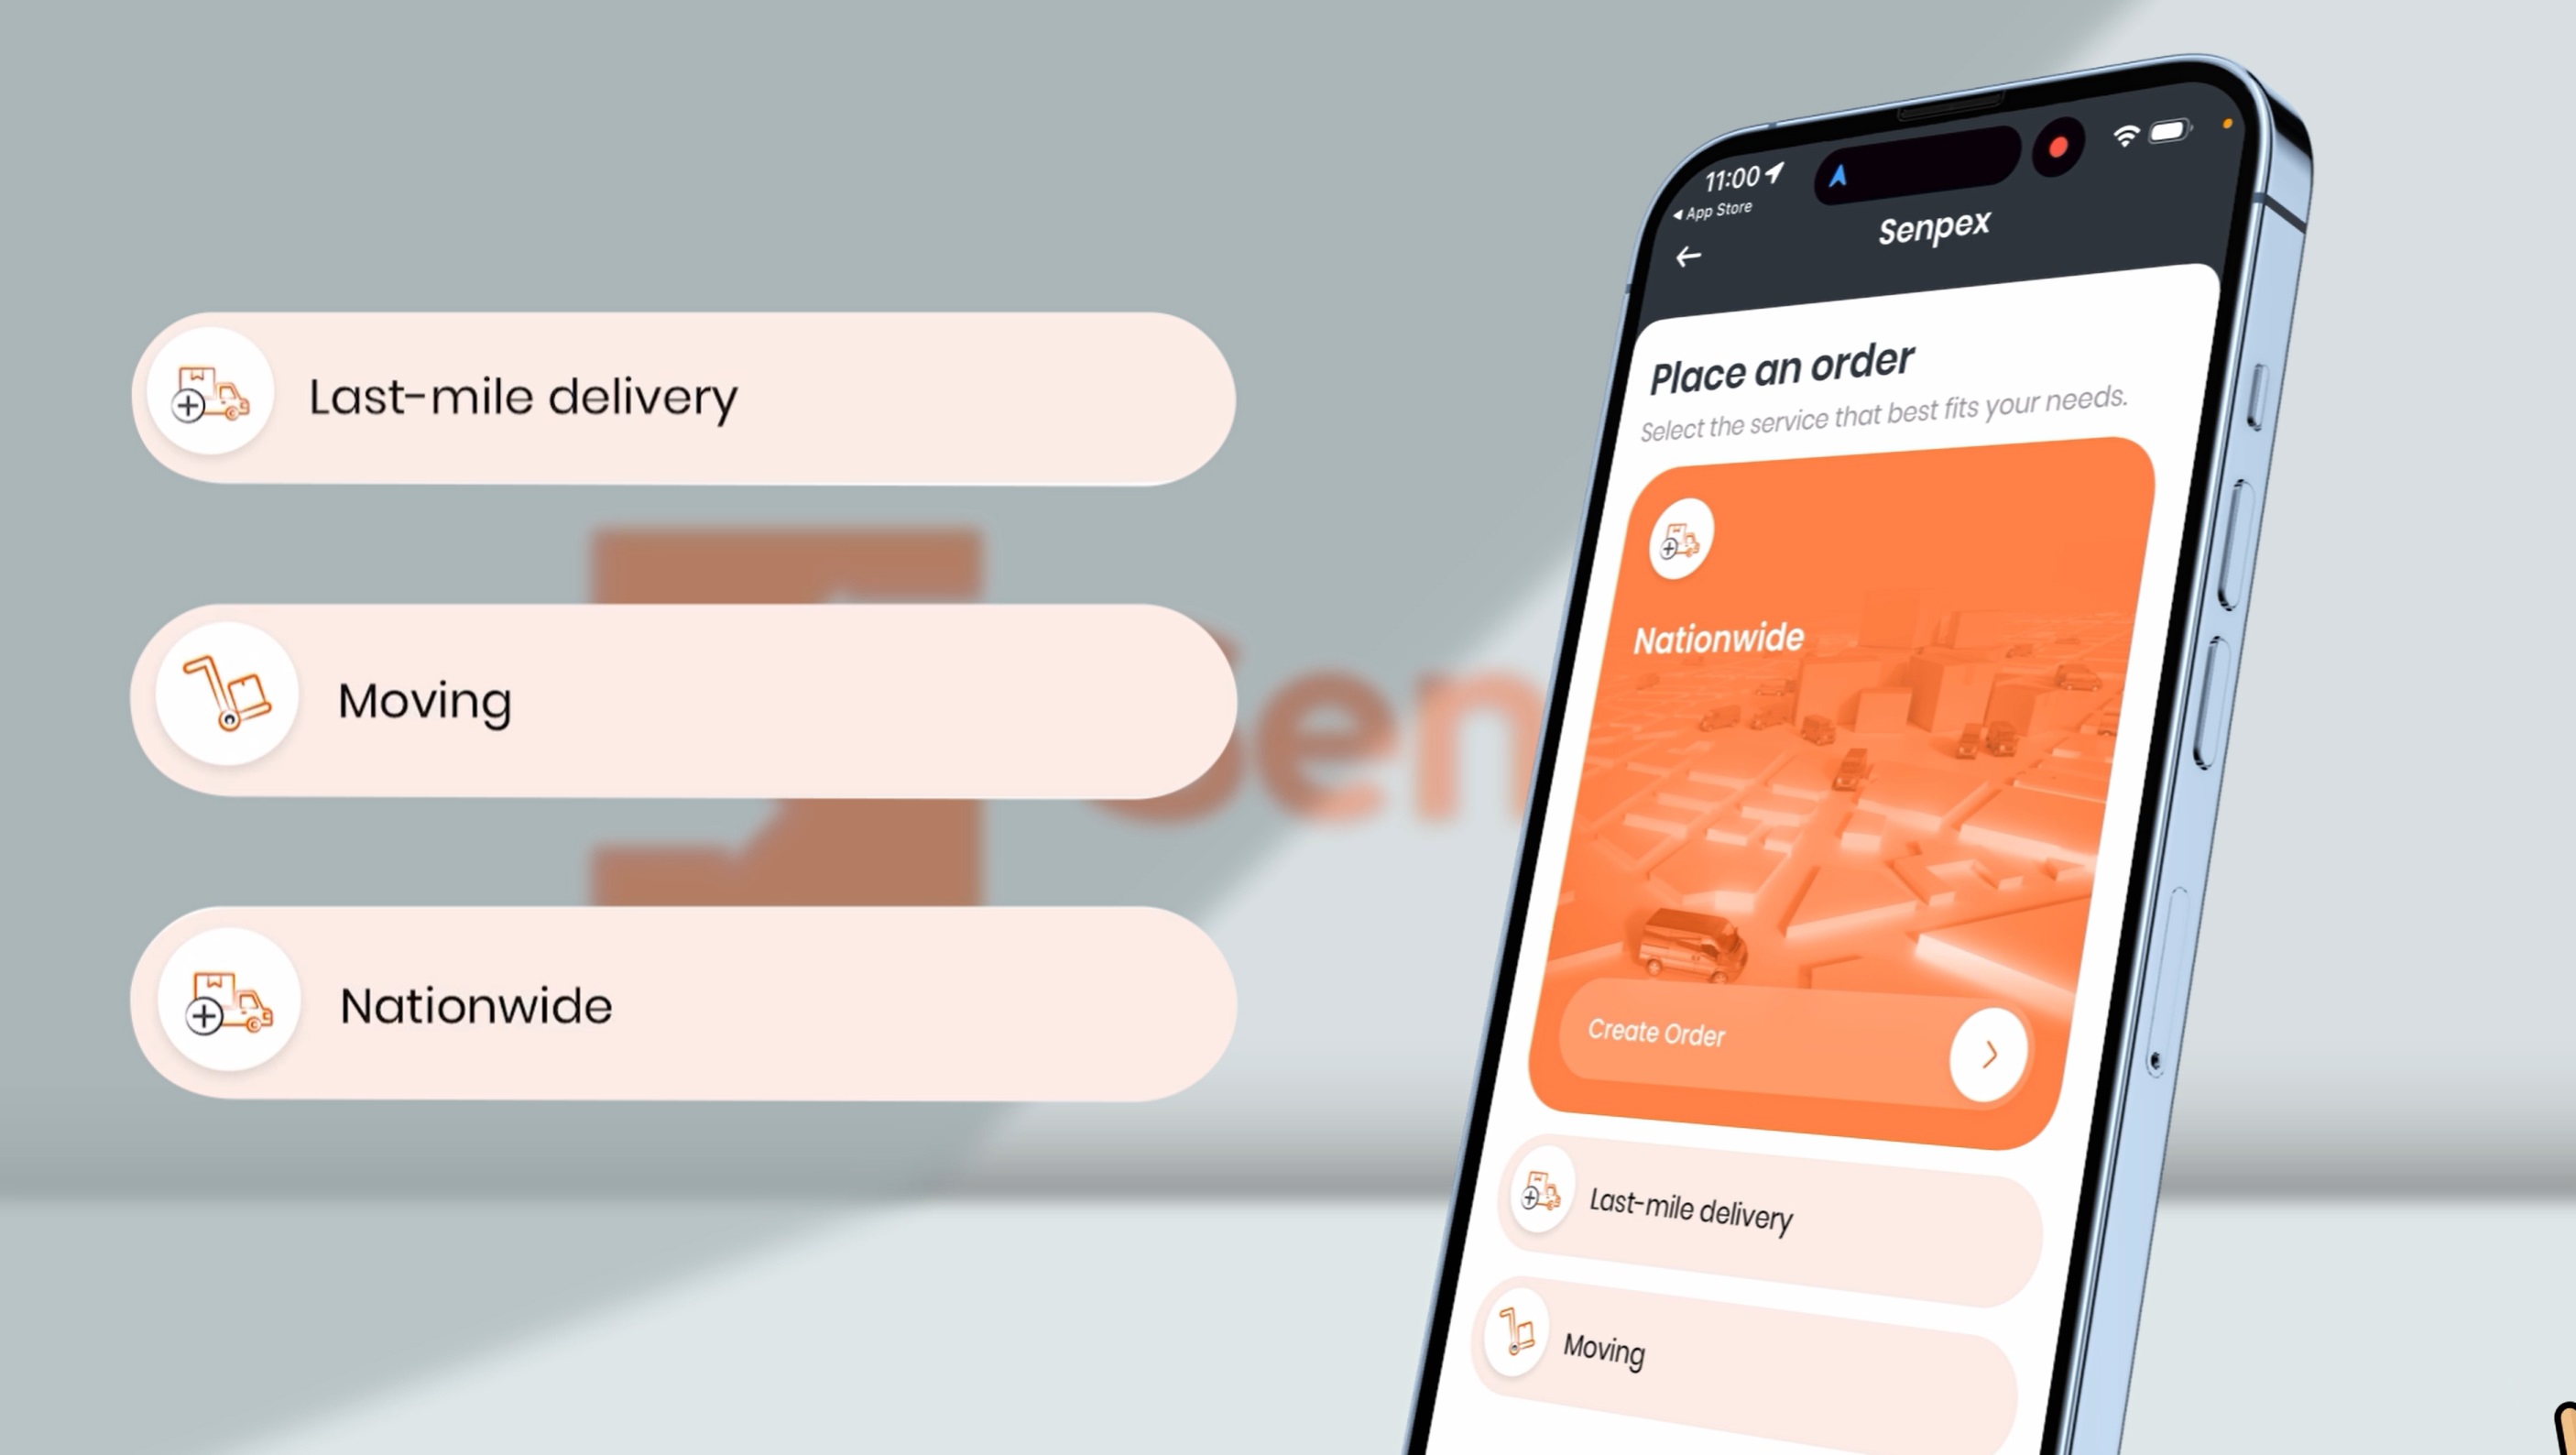 Senpex Technology Launches Intuitive New Mobile App to Provide a Streamlined Last-Mile Delivery Experience to a Wide Range of Users